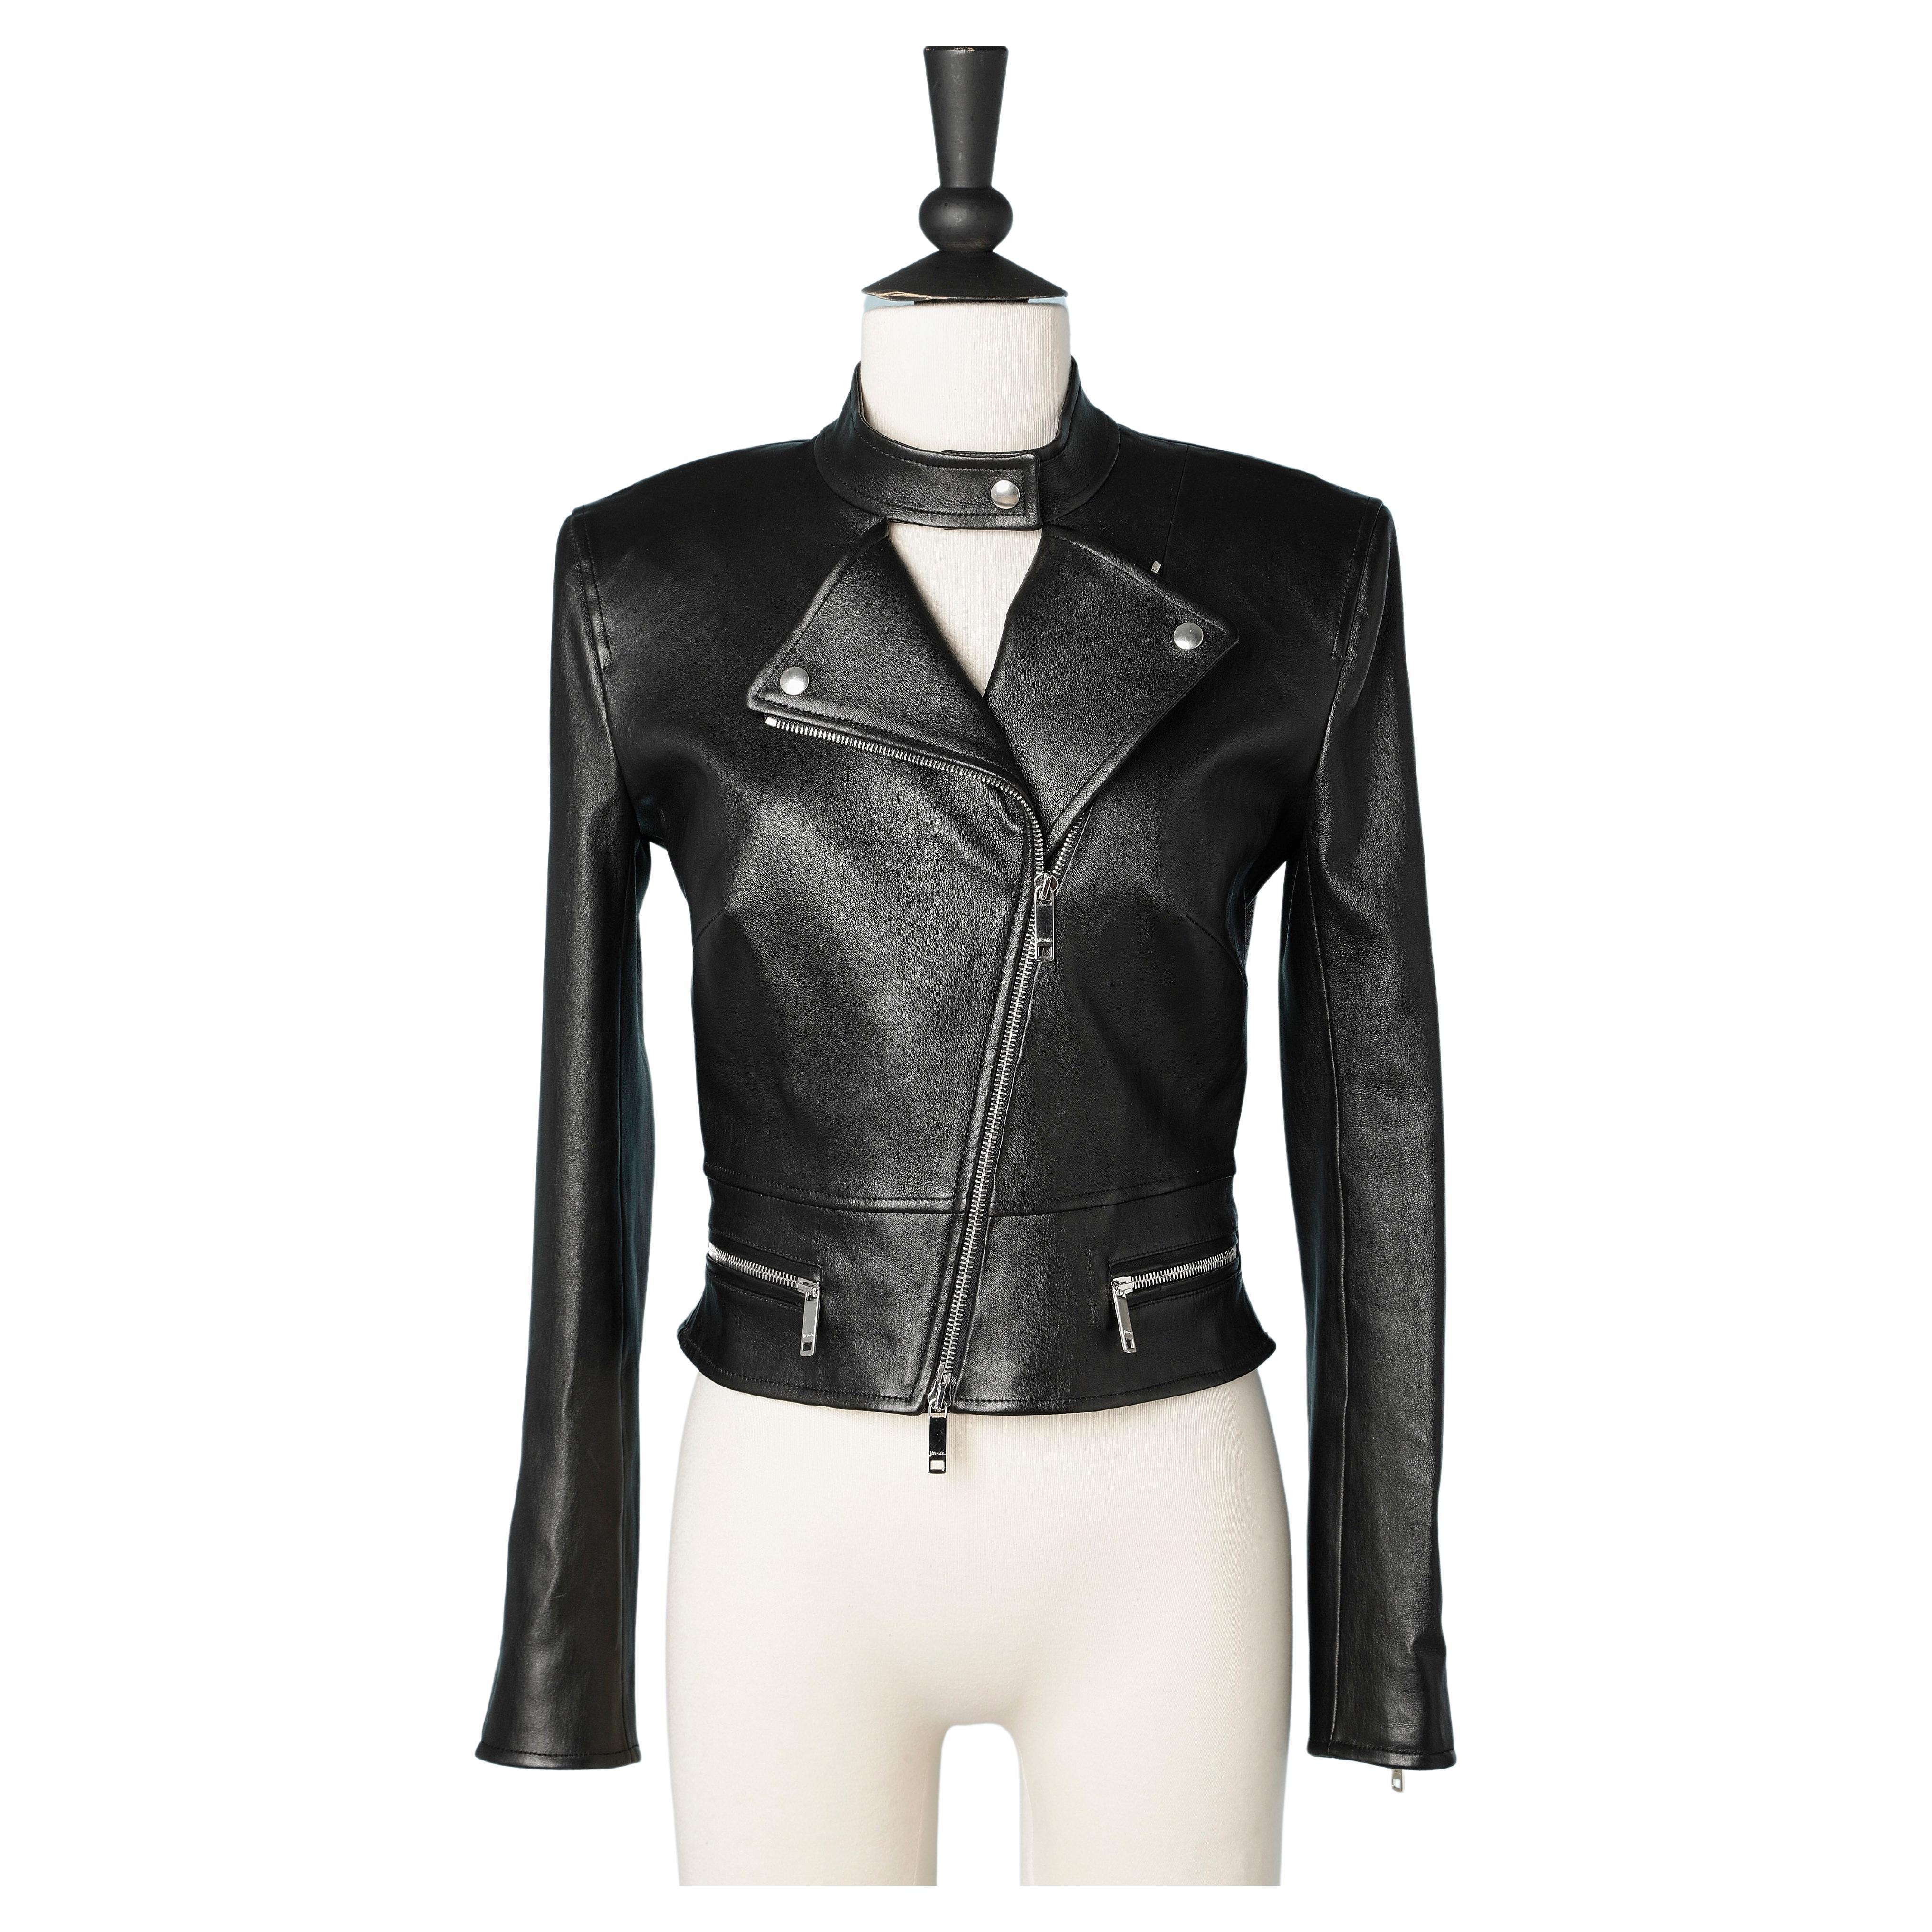 Black perfecto leather jacket Jitrois NEW with tag 